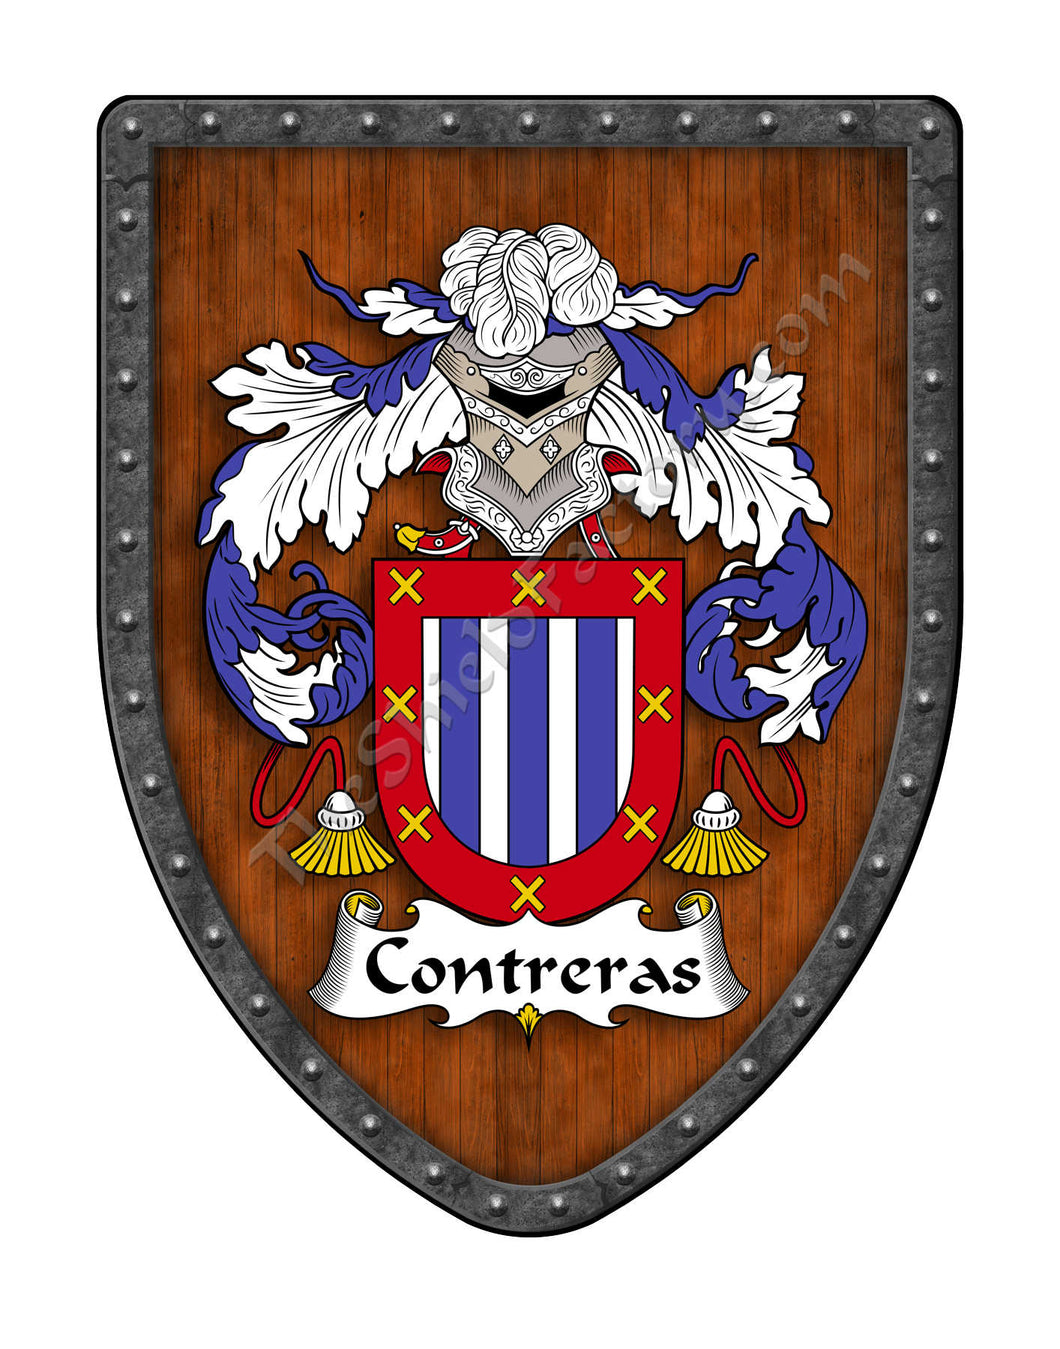 Contreras Coat of Arms Shield Family Crest